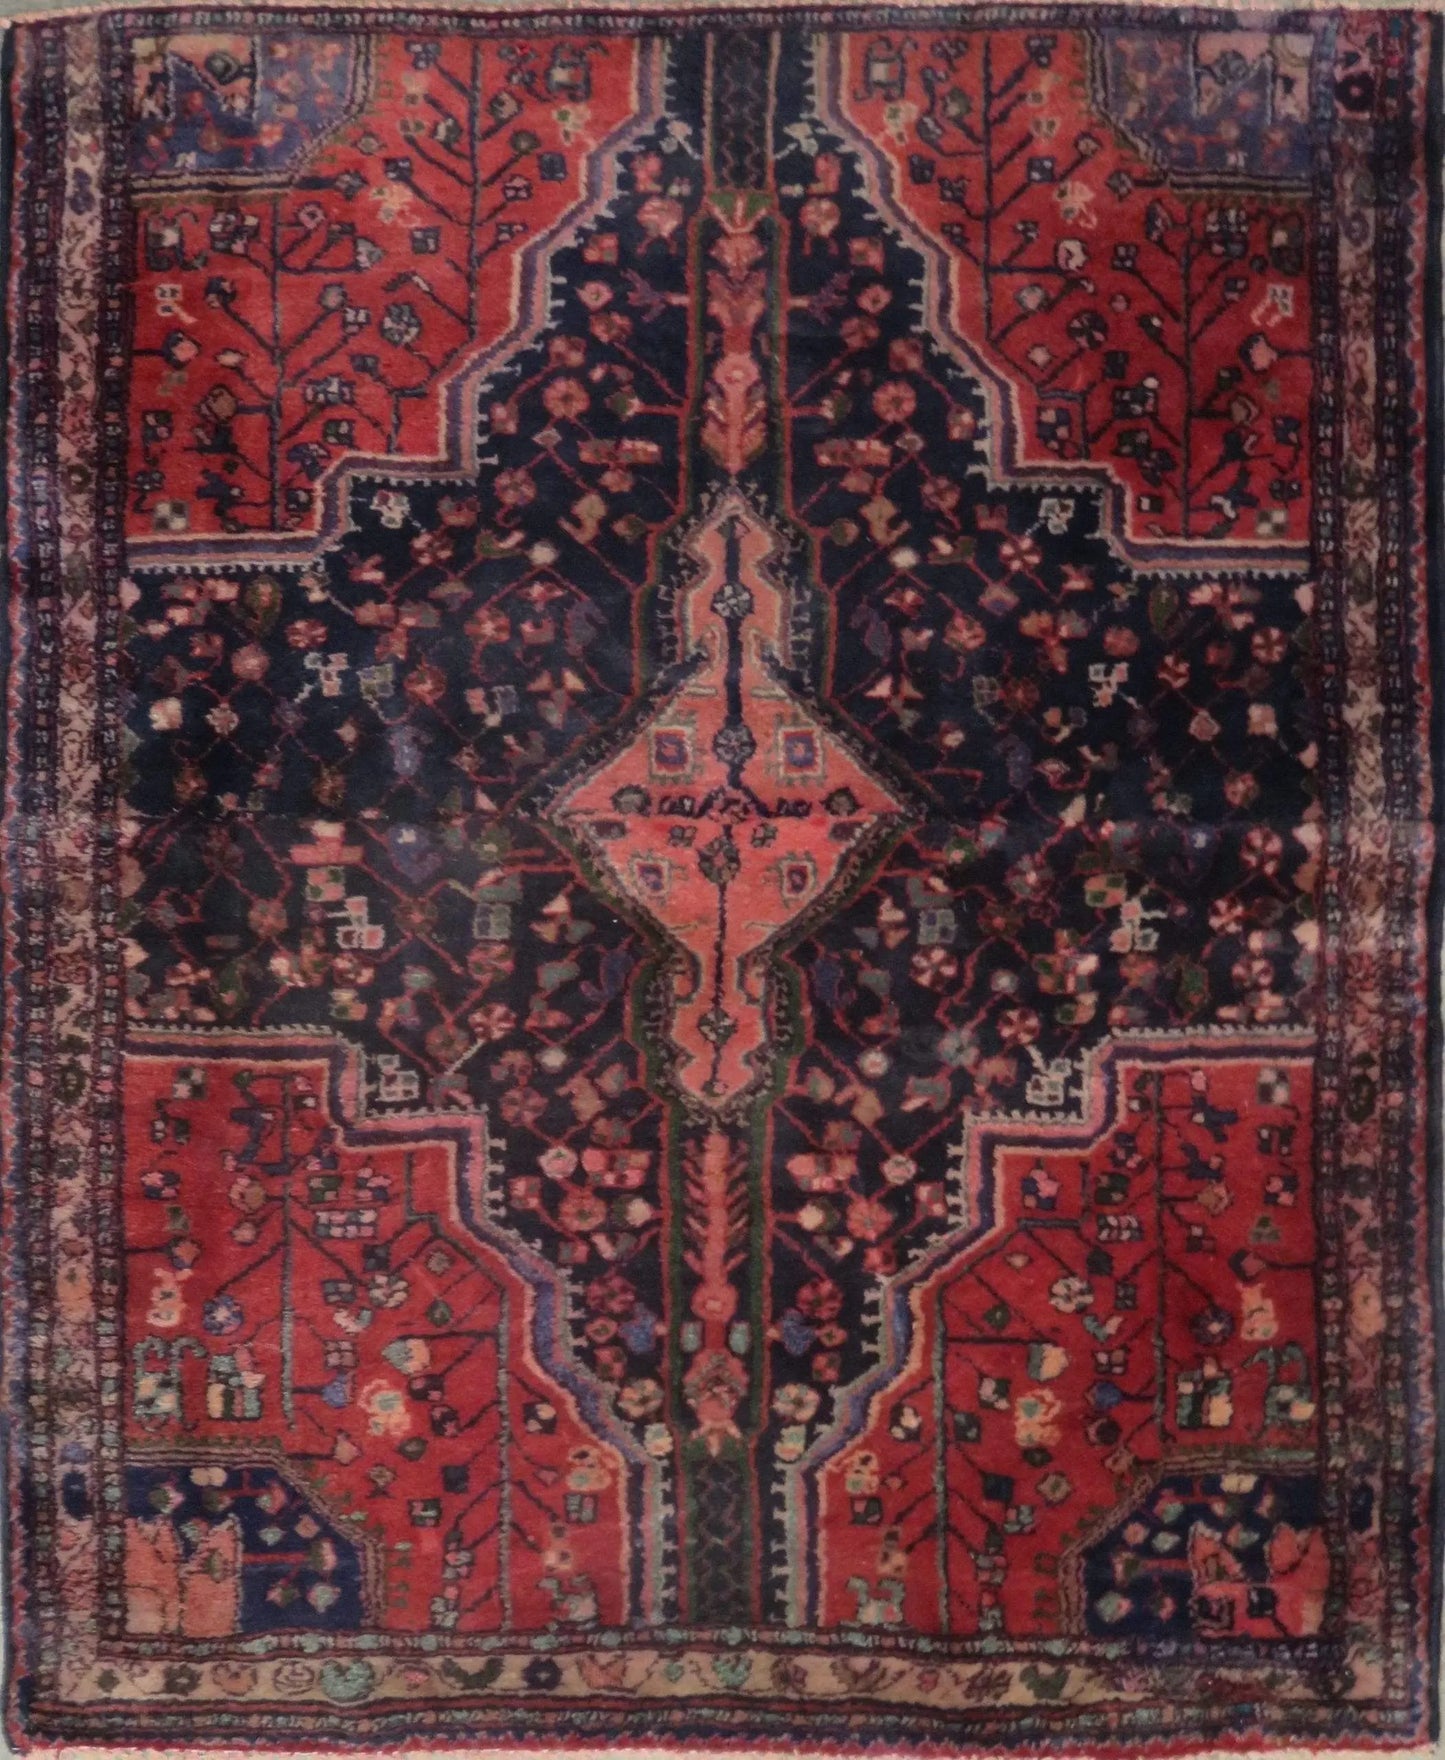 Hand-Knotted Persian Wool Rug _ Luxurious Vintage Design, 4'7" x 4'0", Artisan Crafted